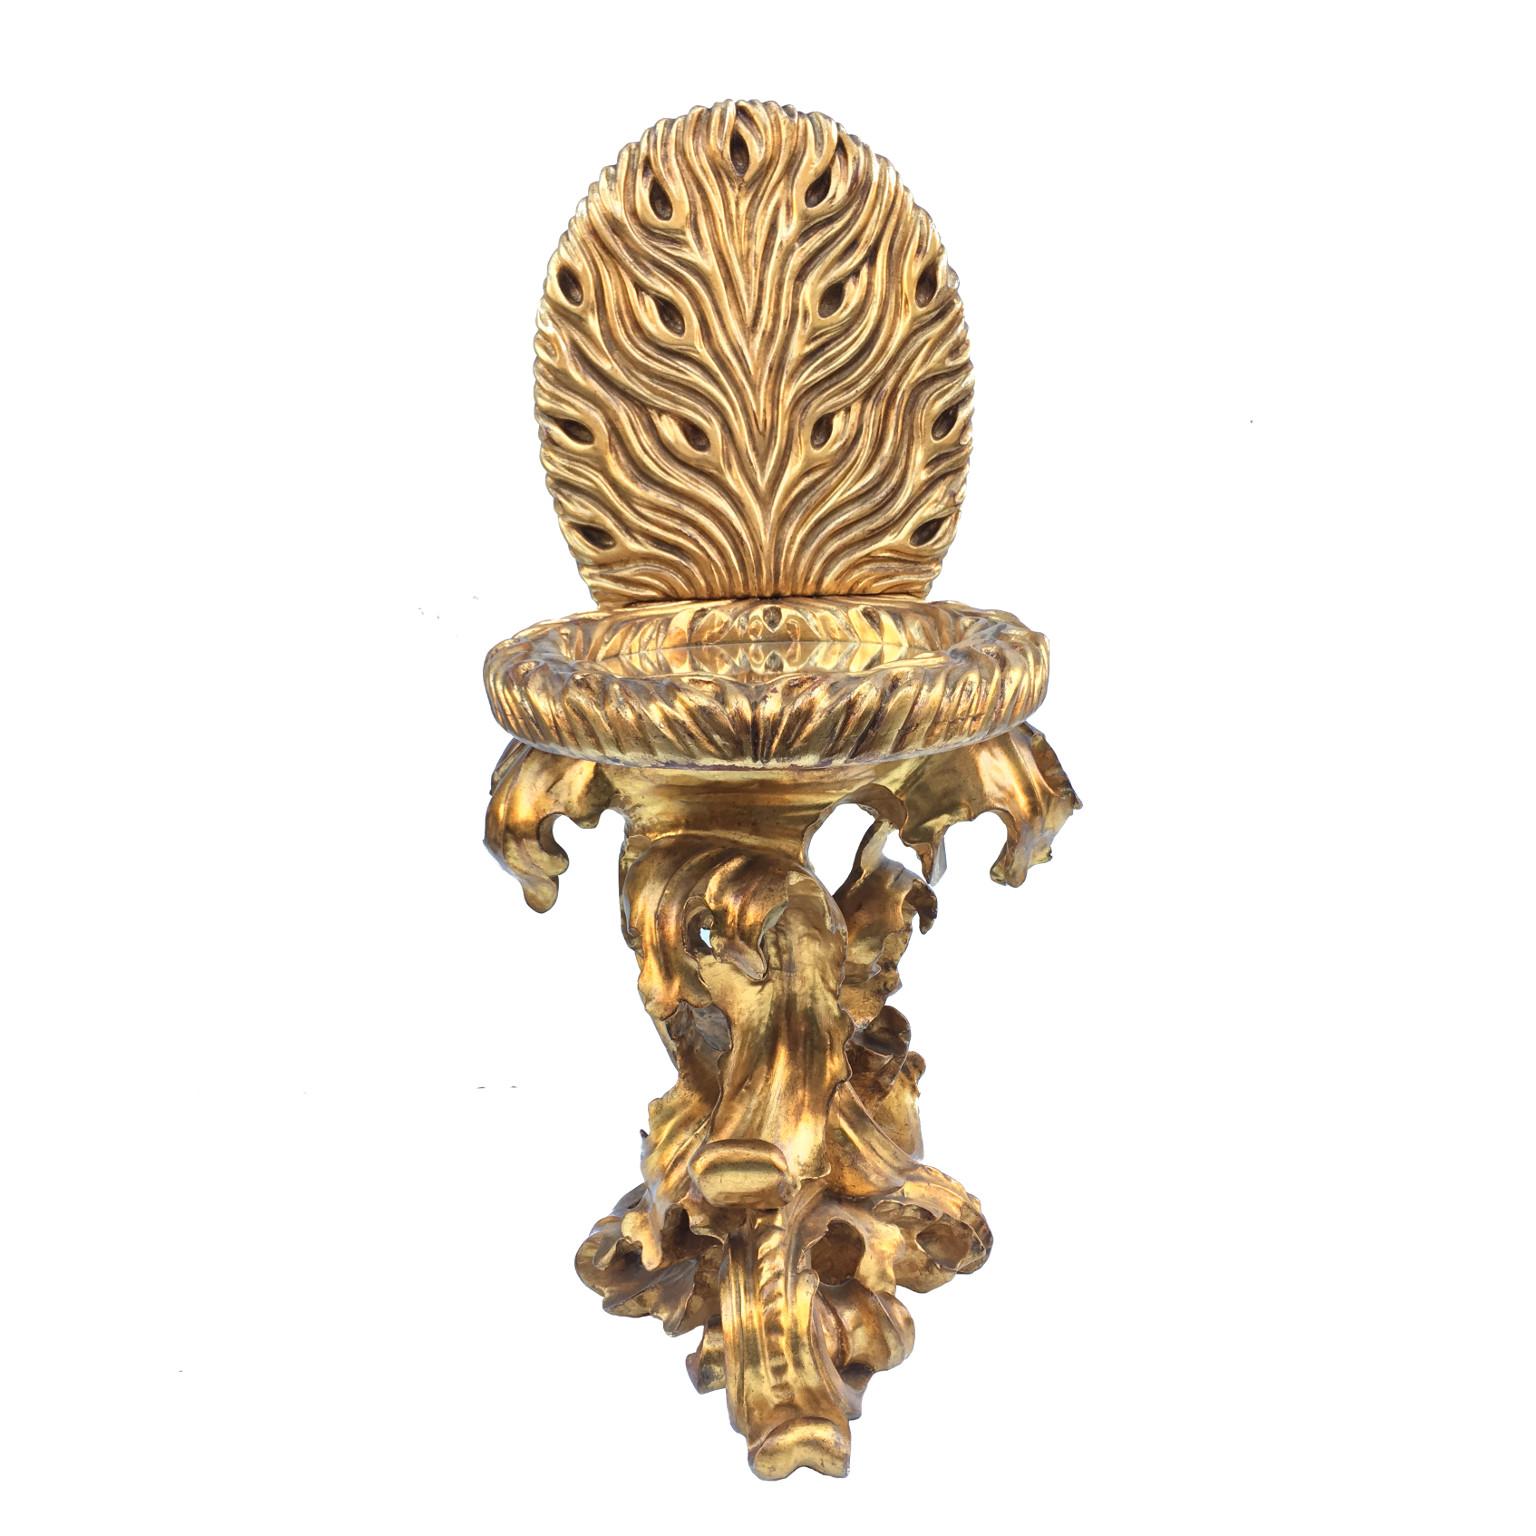 Italian Contemporary Giltwood Toilet Shaped Sculptural Side Table With Mirror Top For Sale